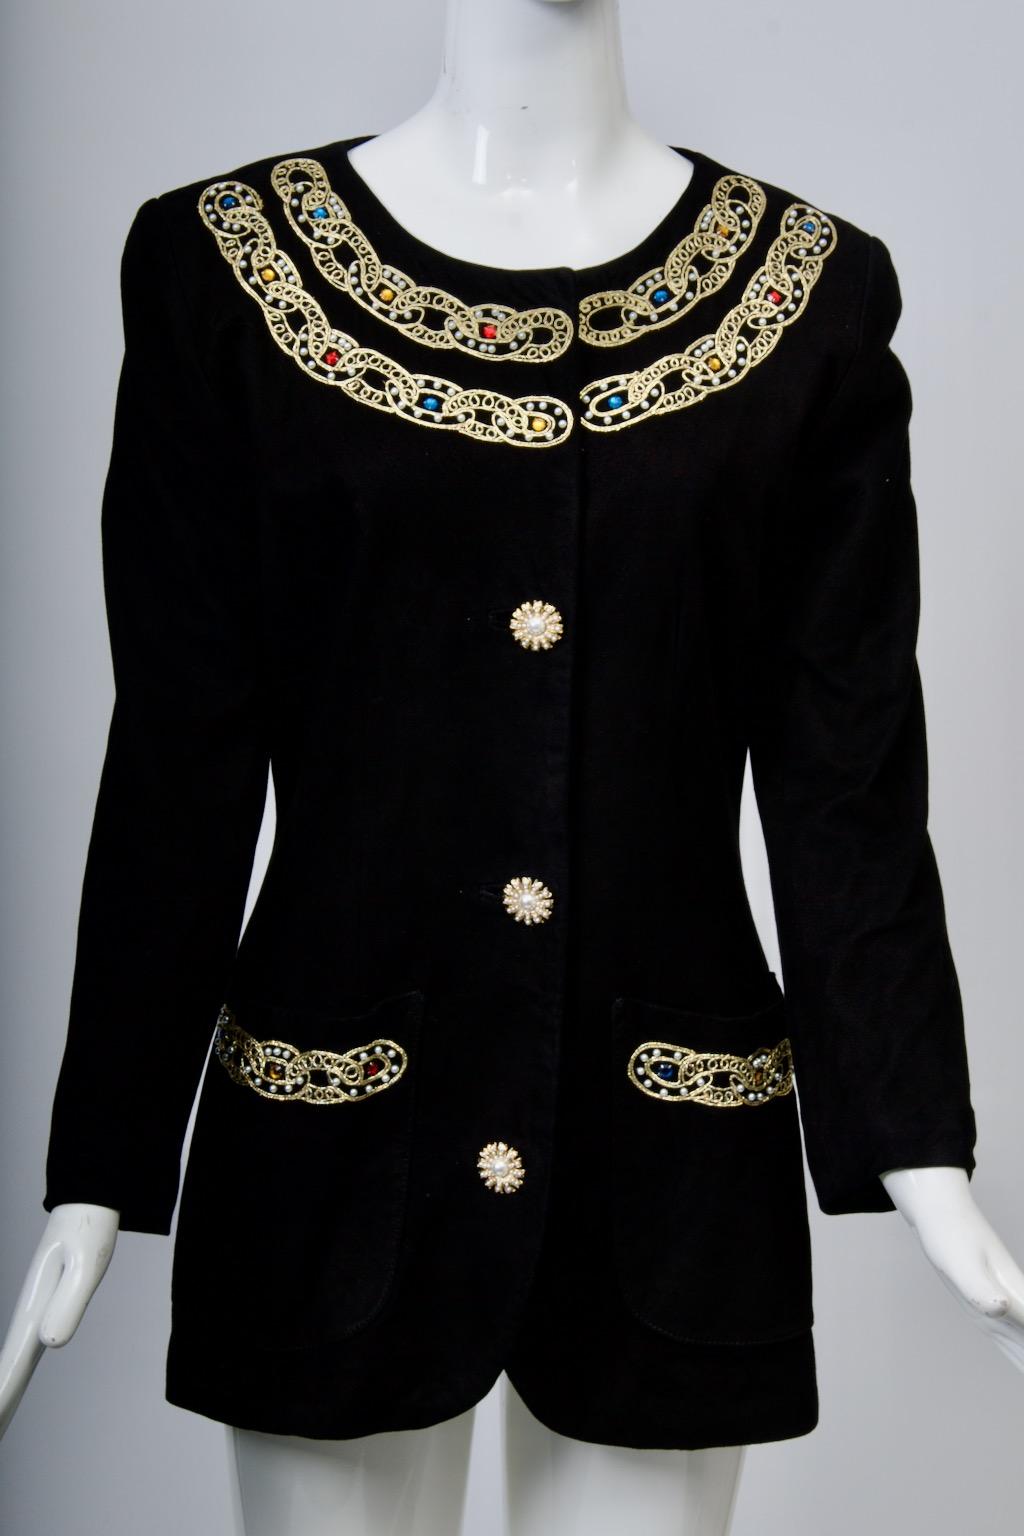 Vakko black suede jacket embellished with gold braid interspersed with multicolor  gems is a showstopper. The long, shaped jacket hits below the hips and features an open neckline trimmed with two rows of the gold braid/stone embellishment, as are